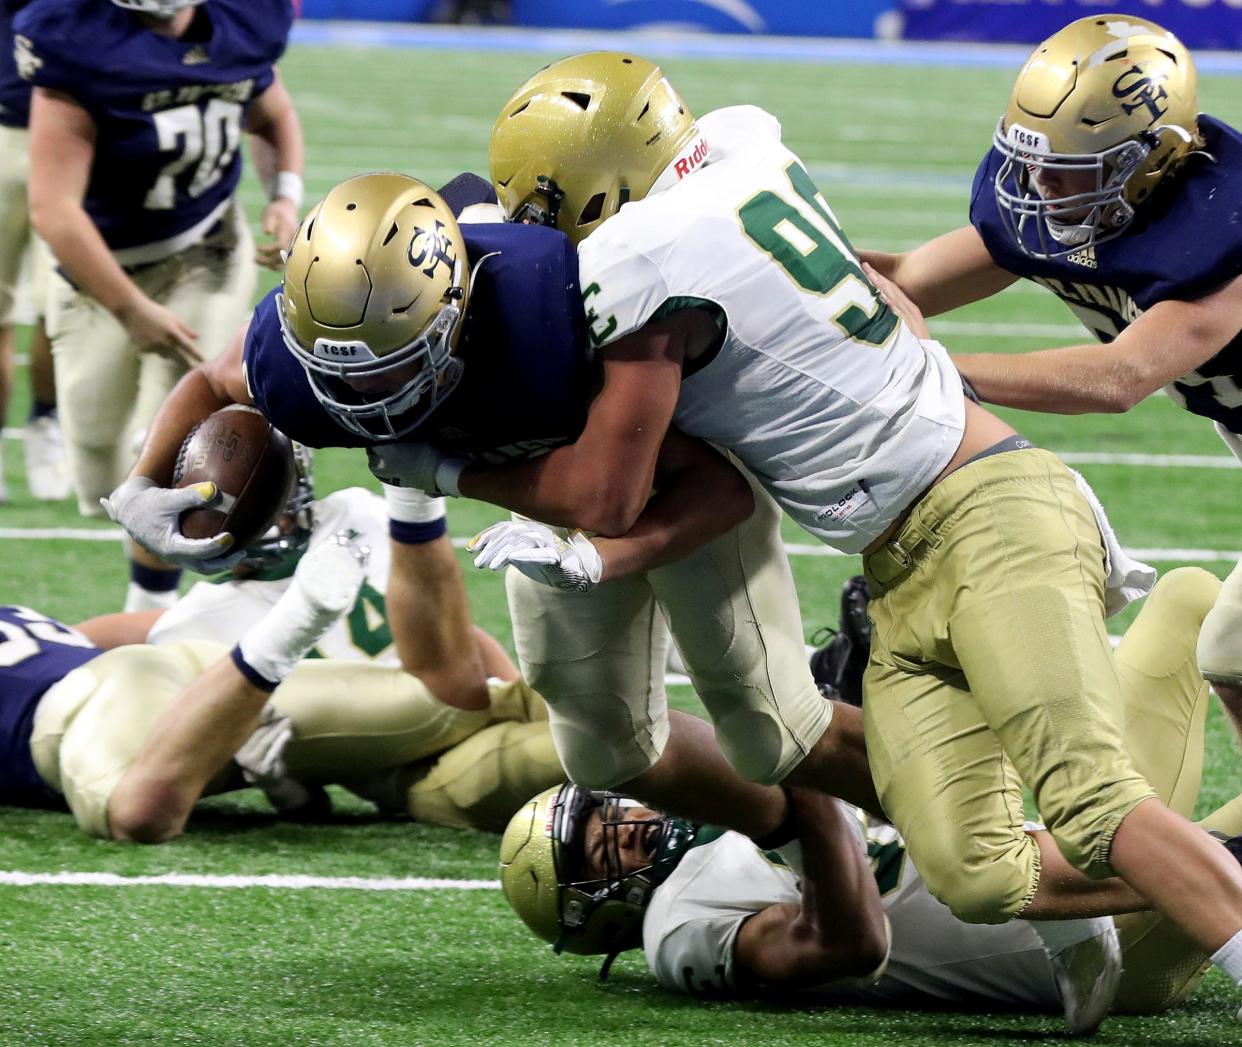 Jackson Lumen Christi's Kadale Williams tries to get into the end zone as Traverse City St. Francis' Conor Smith stops him during the first half of Lumen Christi's 15-12 win in the Division 7 state final at Ford Field on Saturday, Nov 26, 2022.